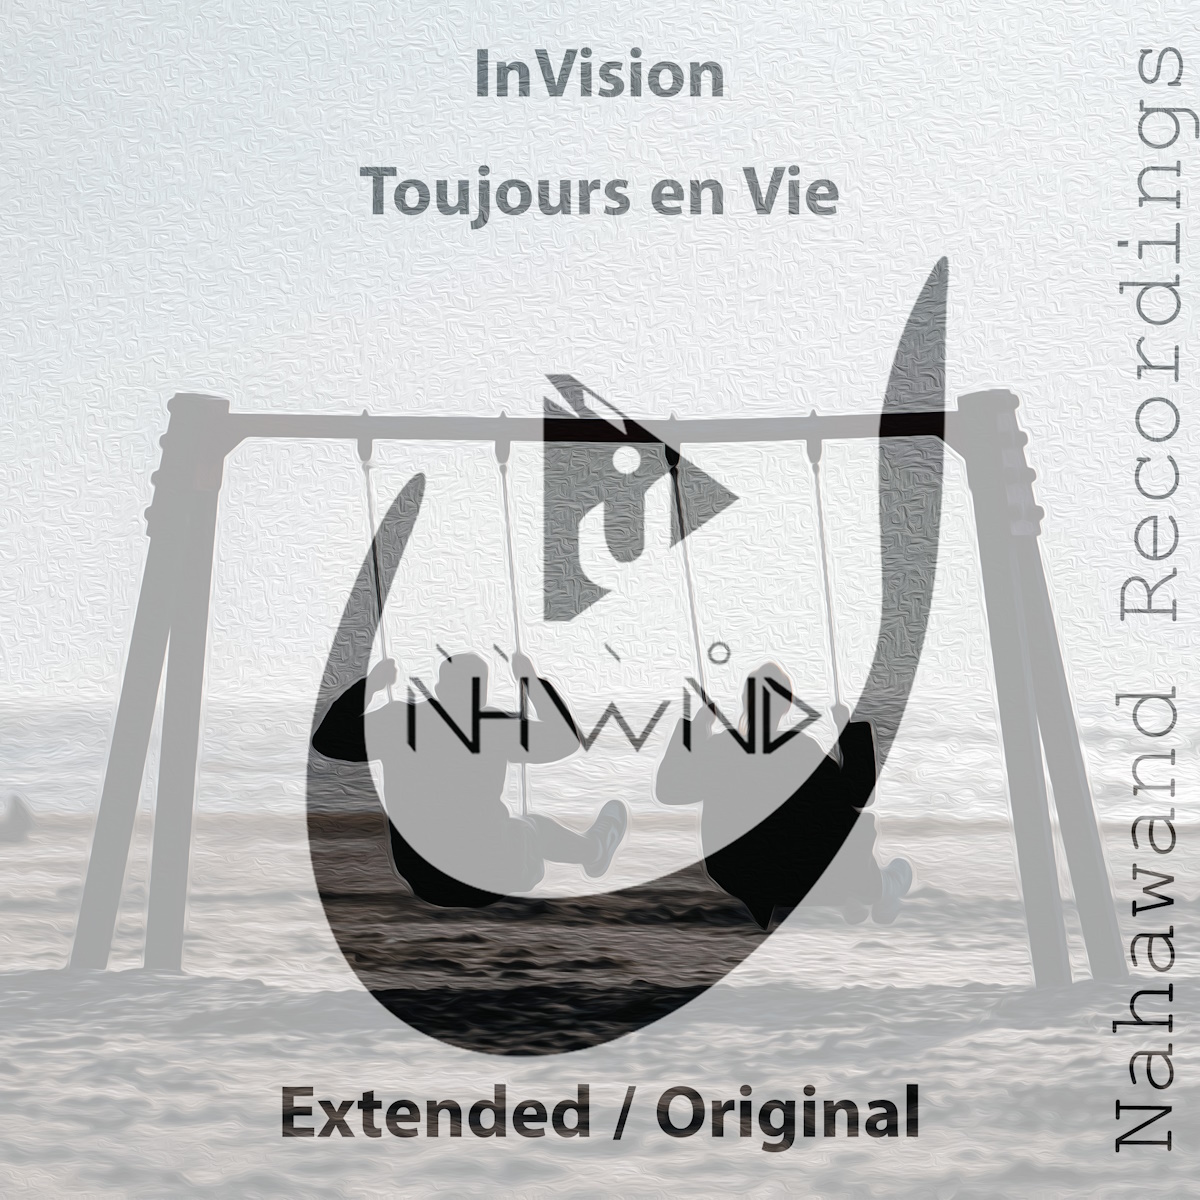 InVision presents Toujours en Vie on Nahawand Recordings